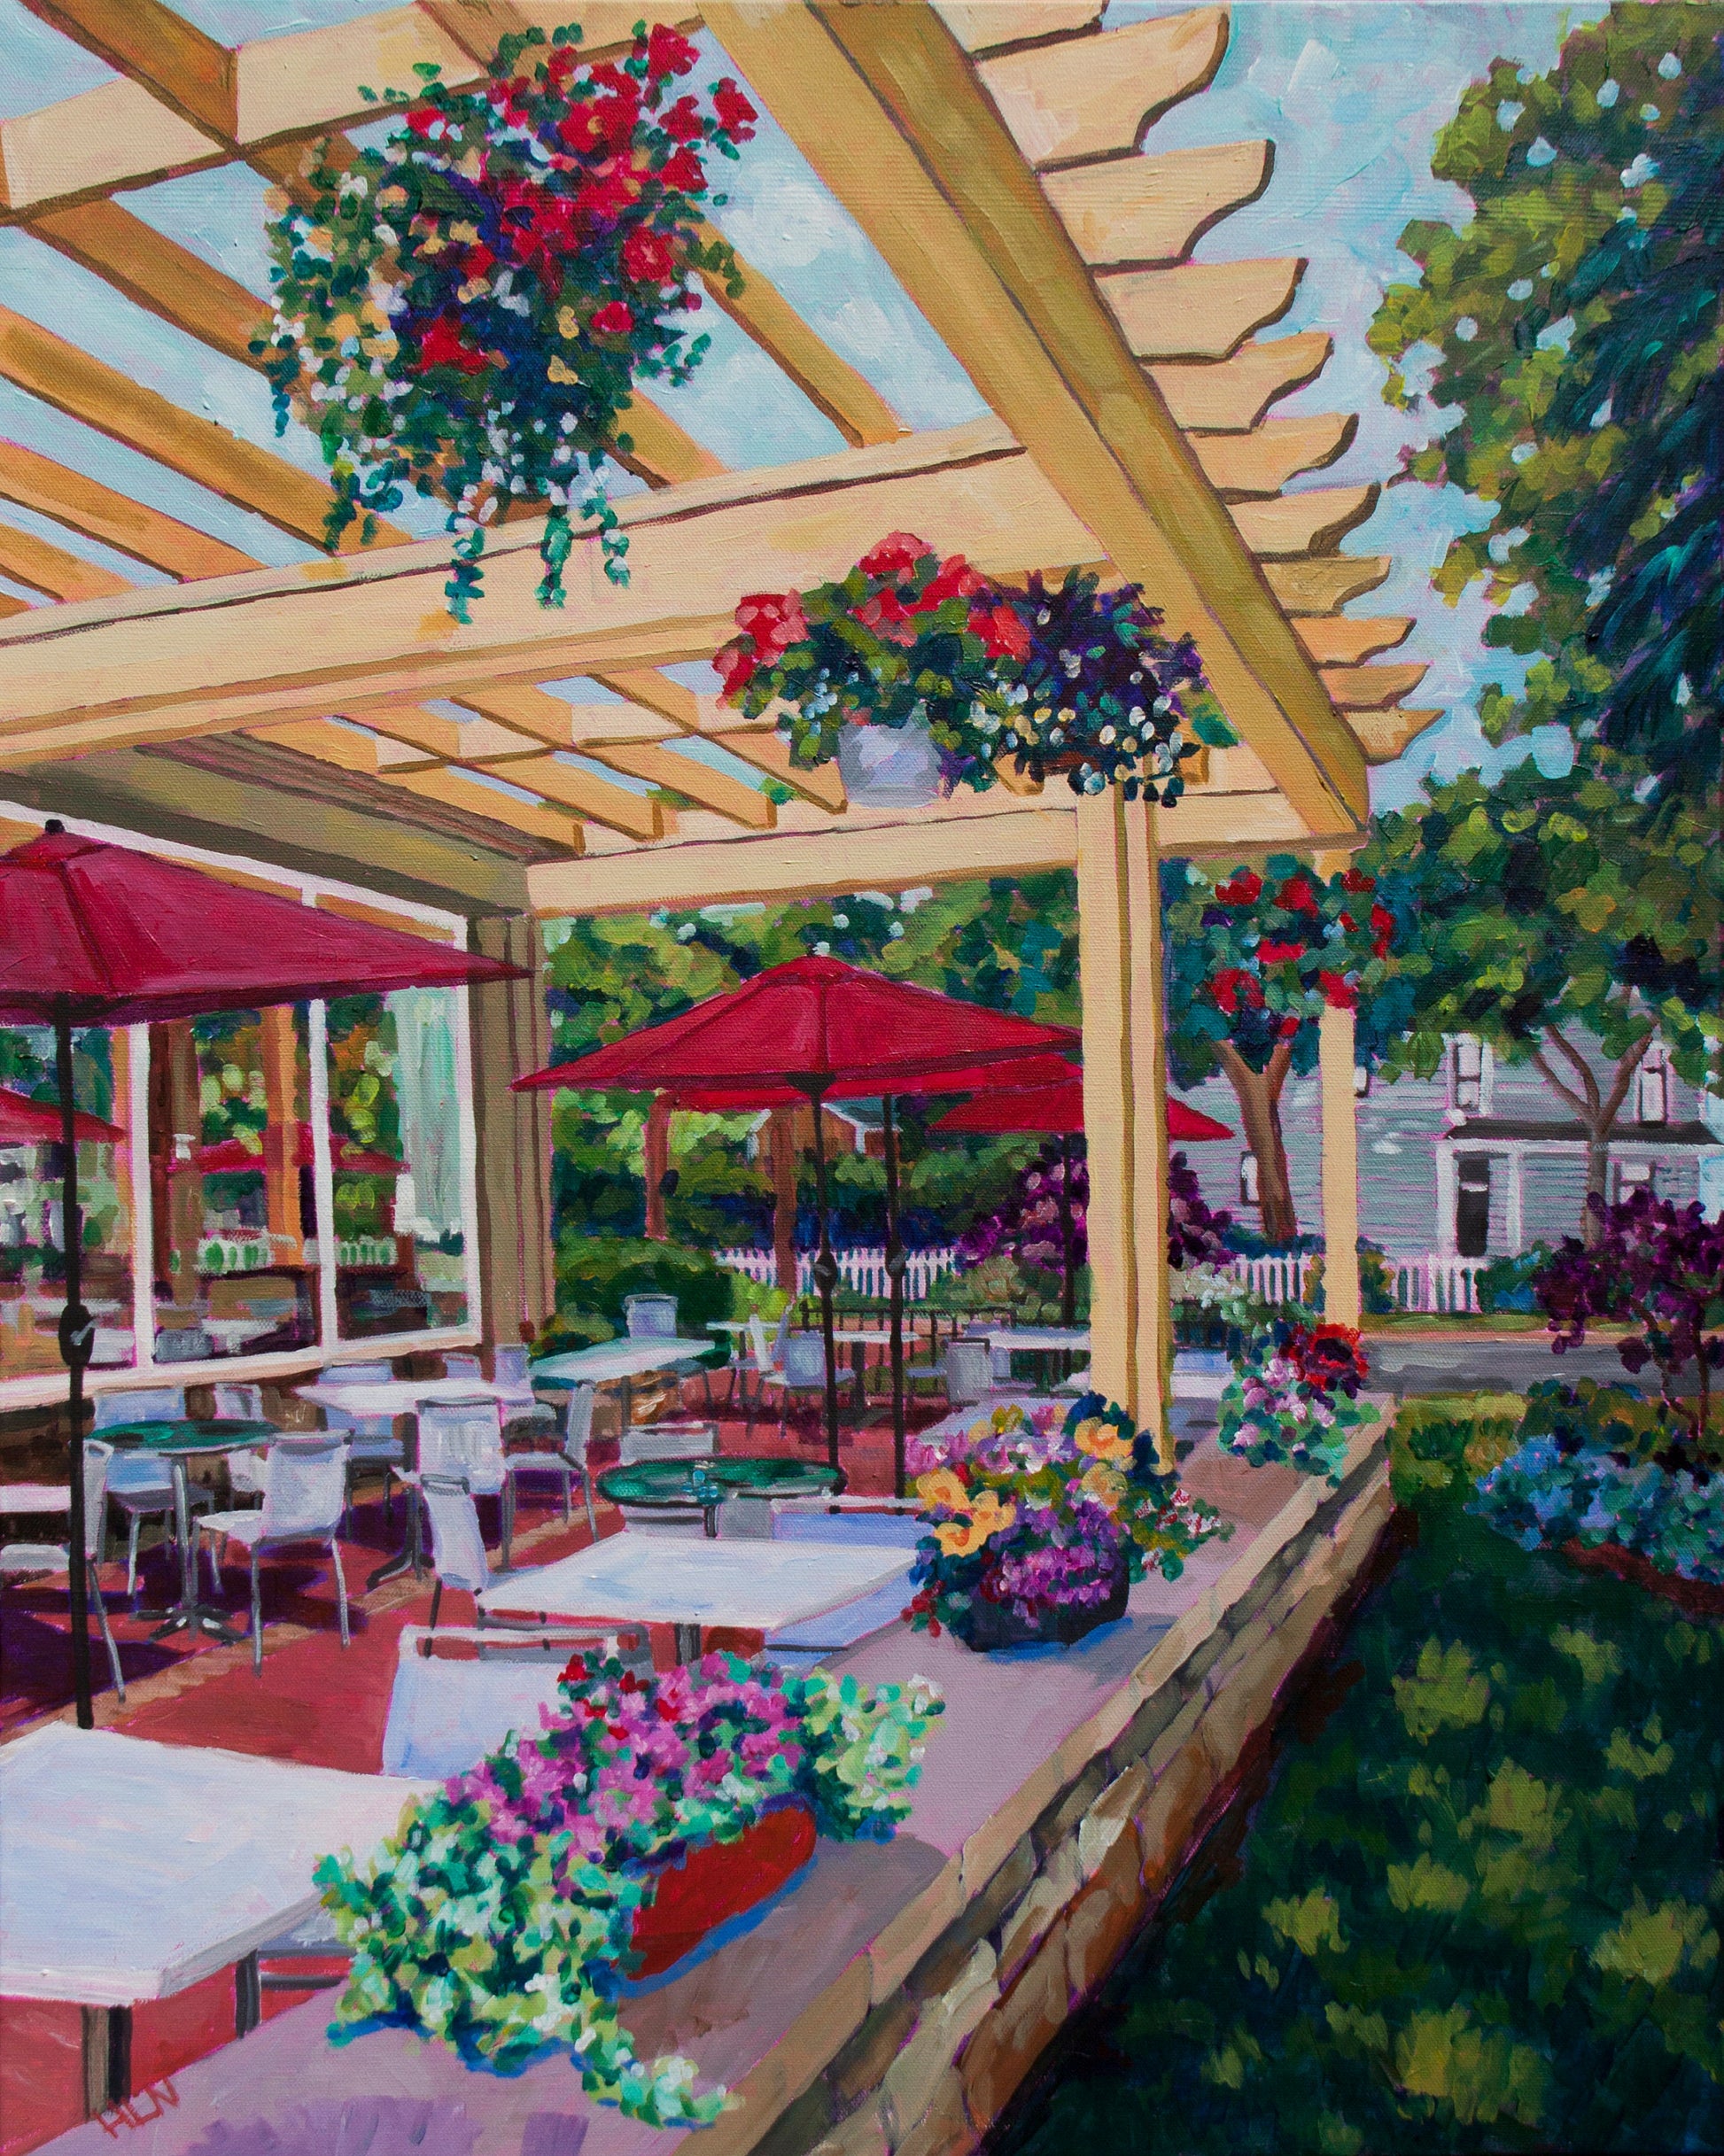 Original vibrant impressionistic painting of a Cafe with red umbrellas and flowers in Niagara on the Lake in Ontario Canada